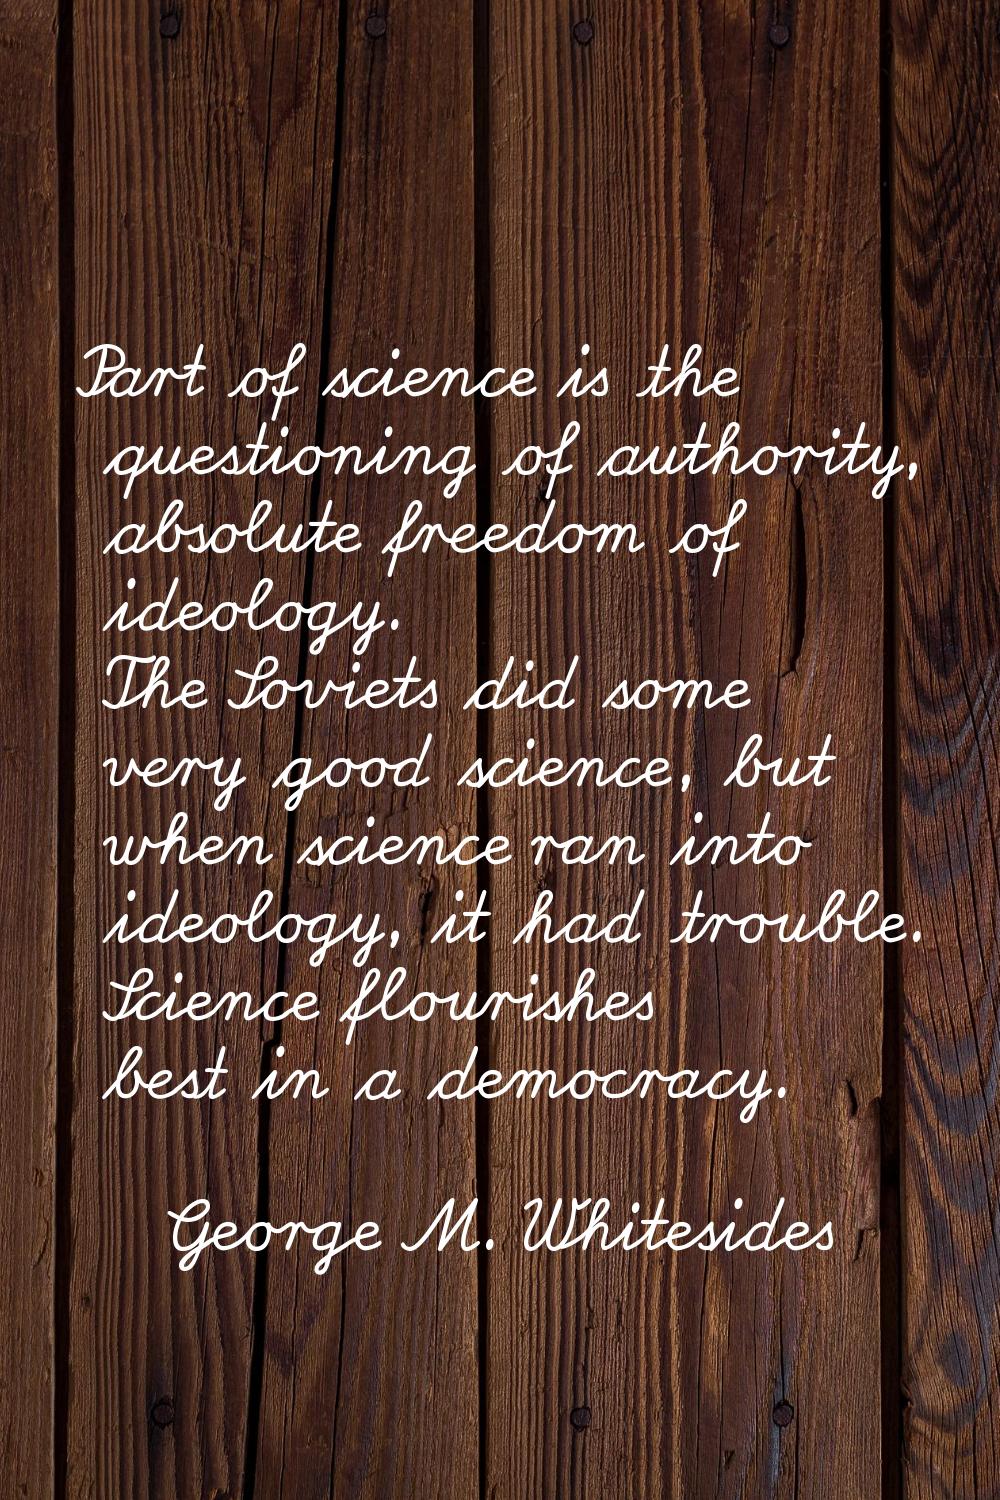 Part of science is the questioning of authority, absolute freedom of ideology. The Soviets did some